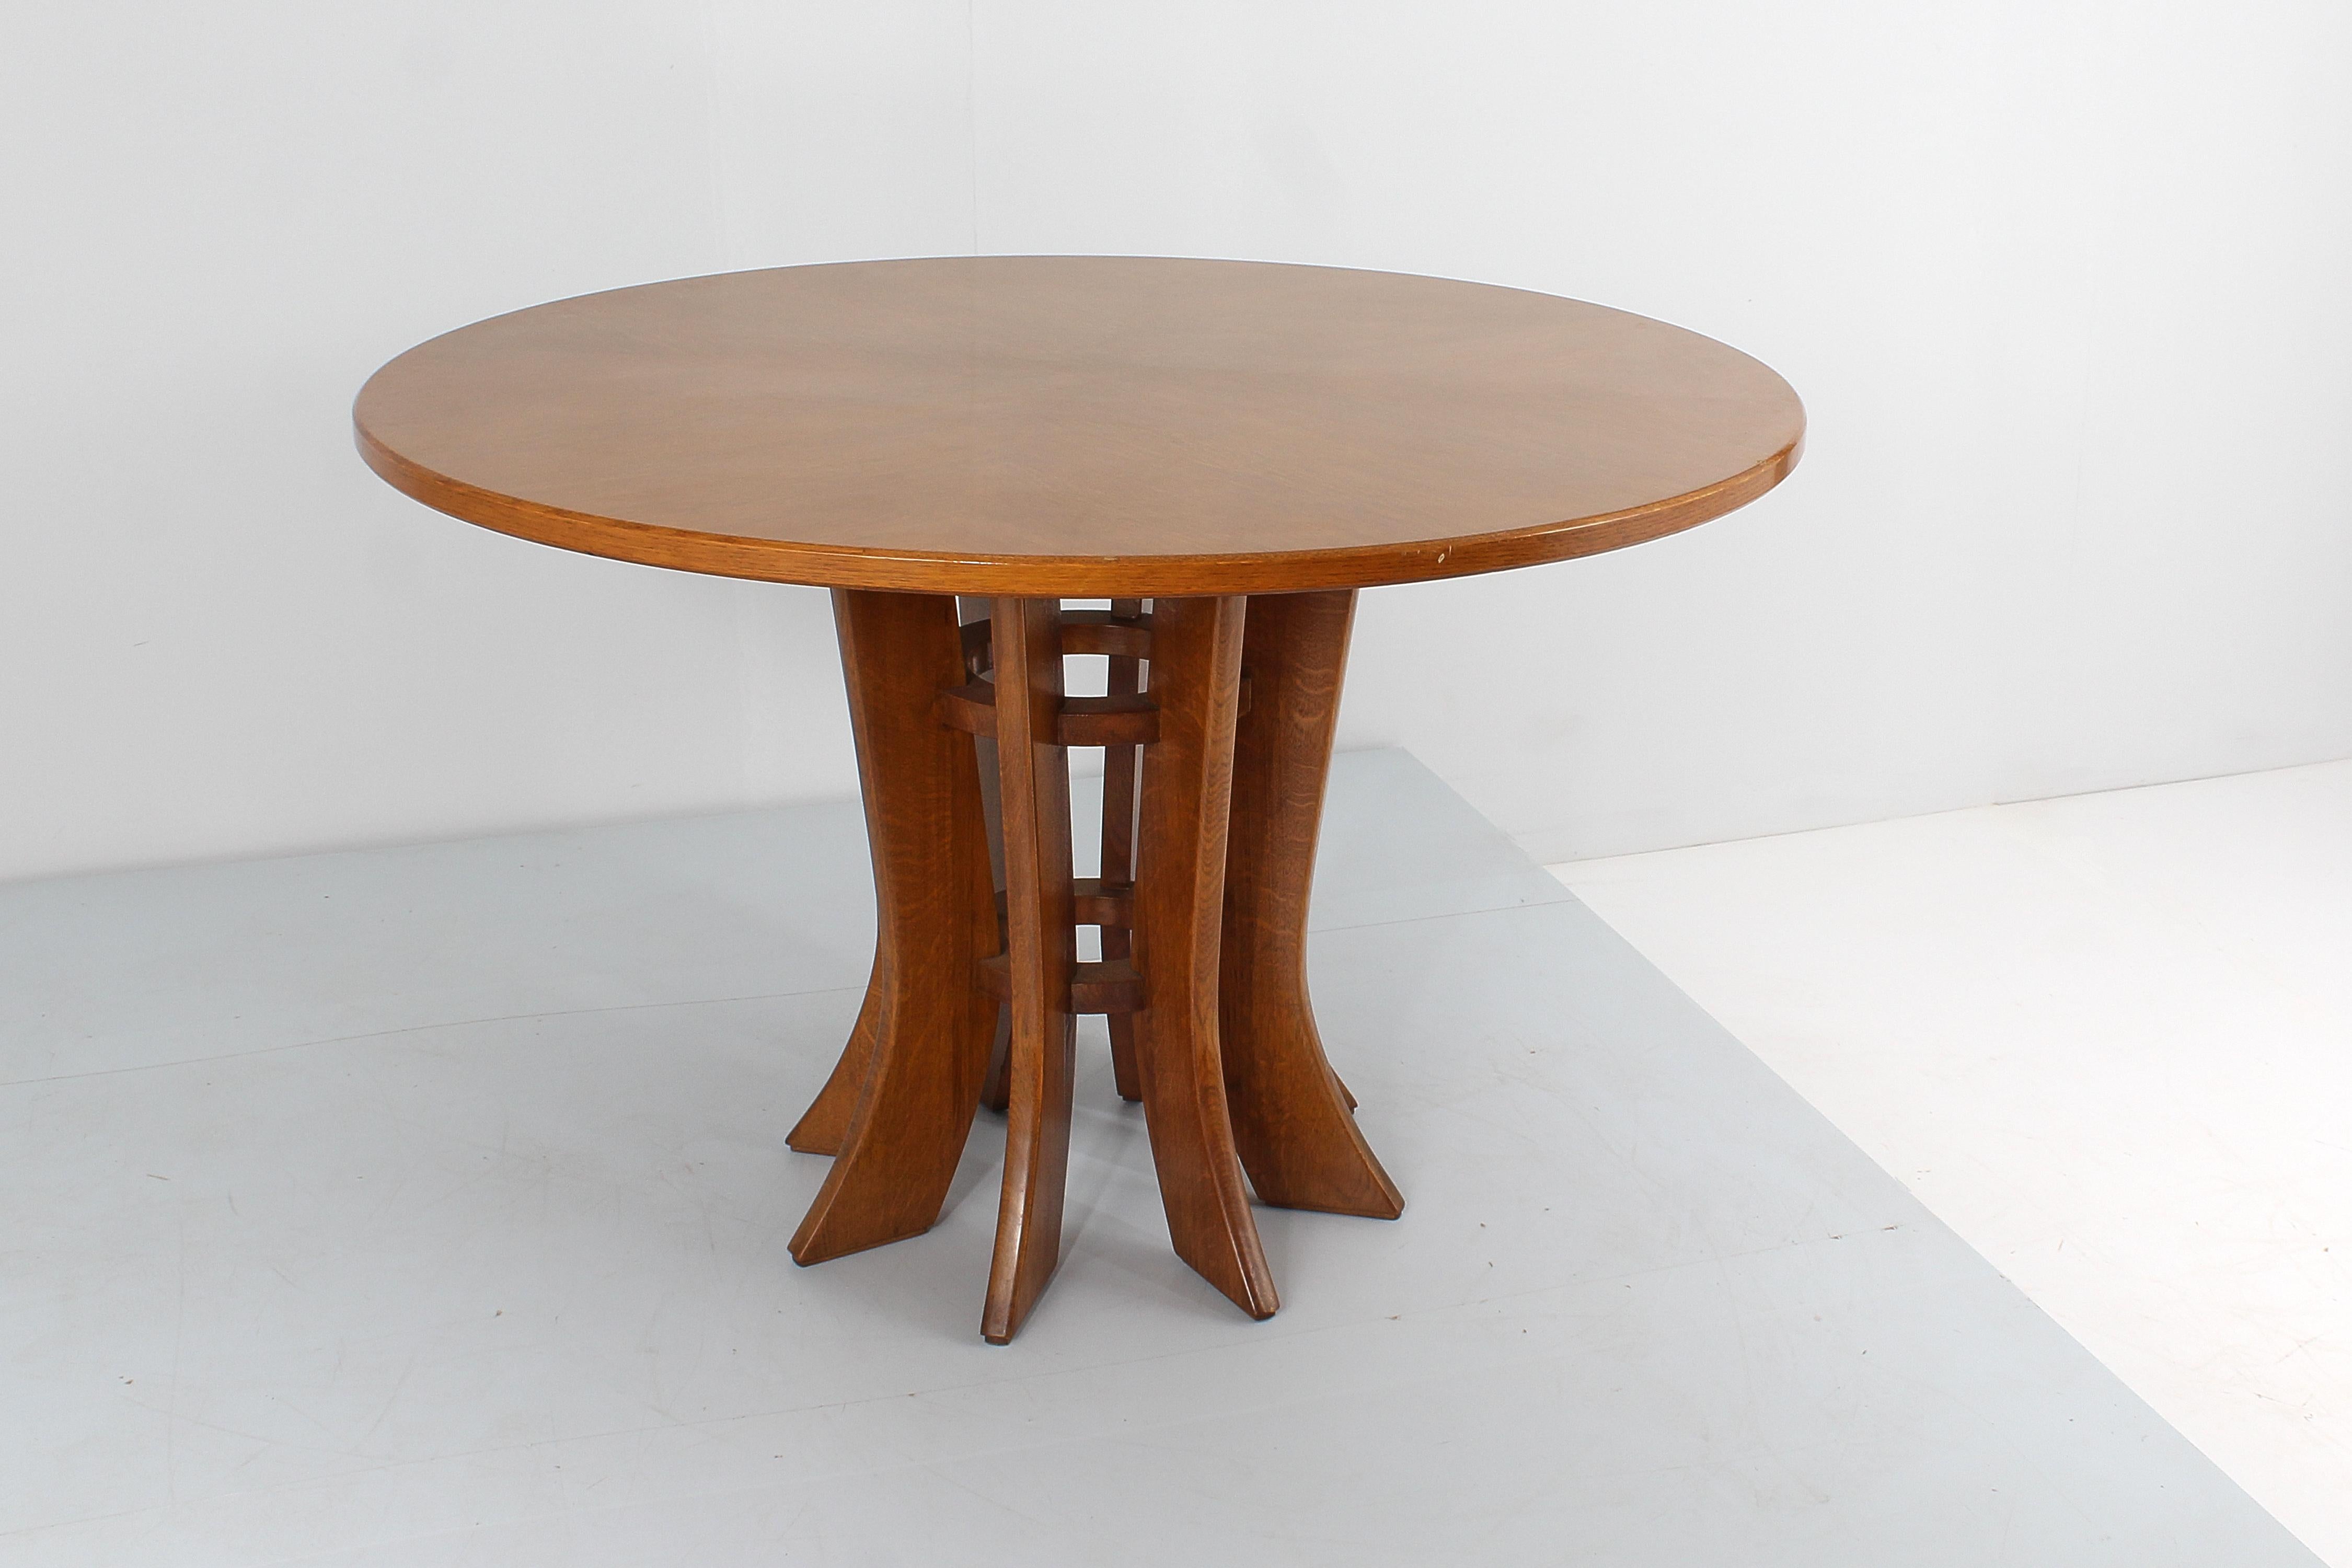 Mid-Century Modern Mid-Century A. Mangiarotti style Wooden Round Diner Table 70s Italy For Sale